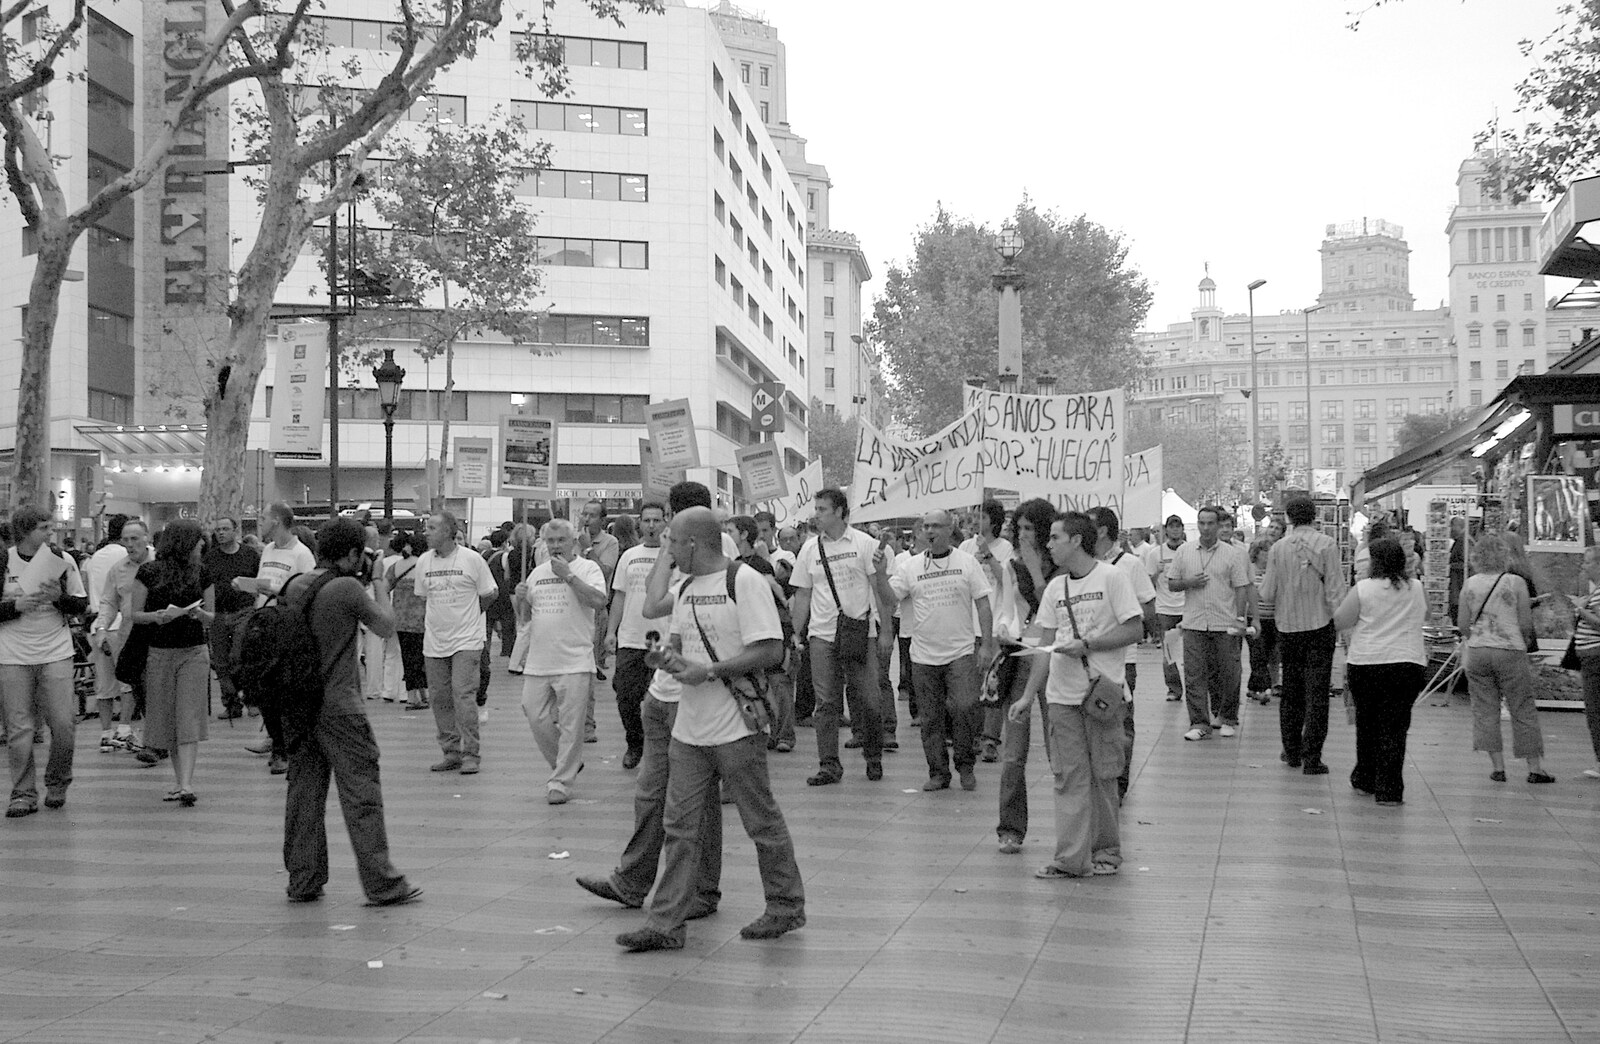 There's a demonstration going on on Las Ramblas from Two Days in Barcelona, Catalunya, Spain - 22nd September 2006